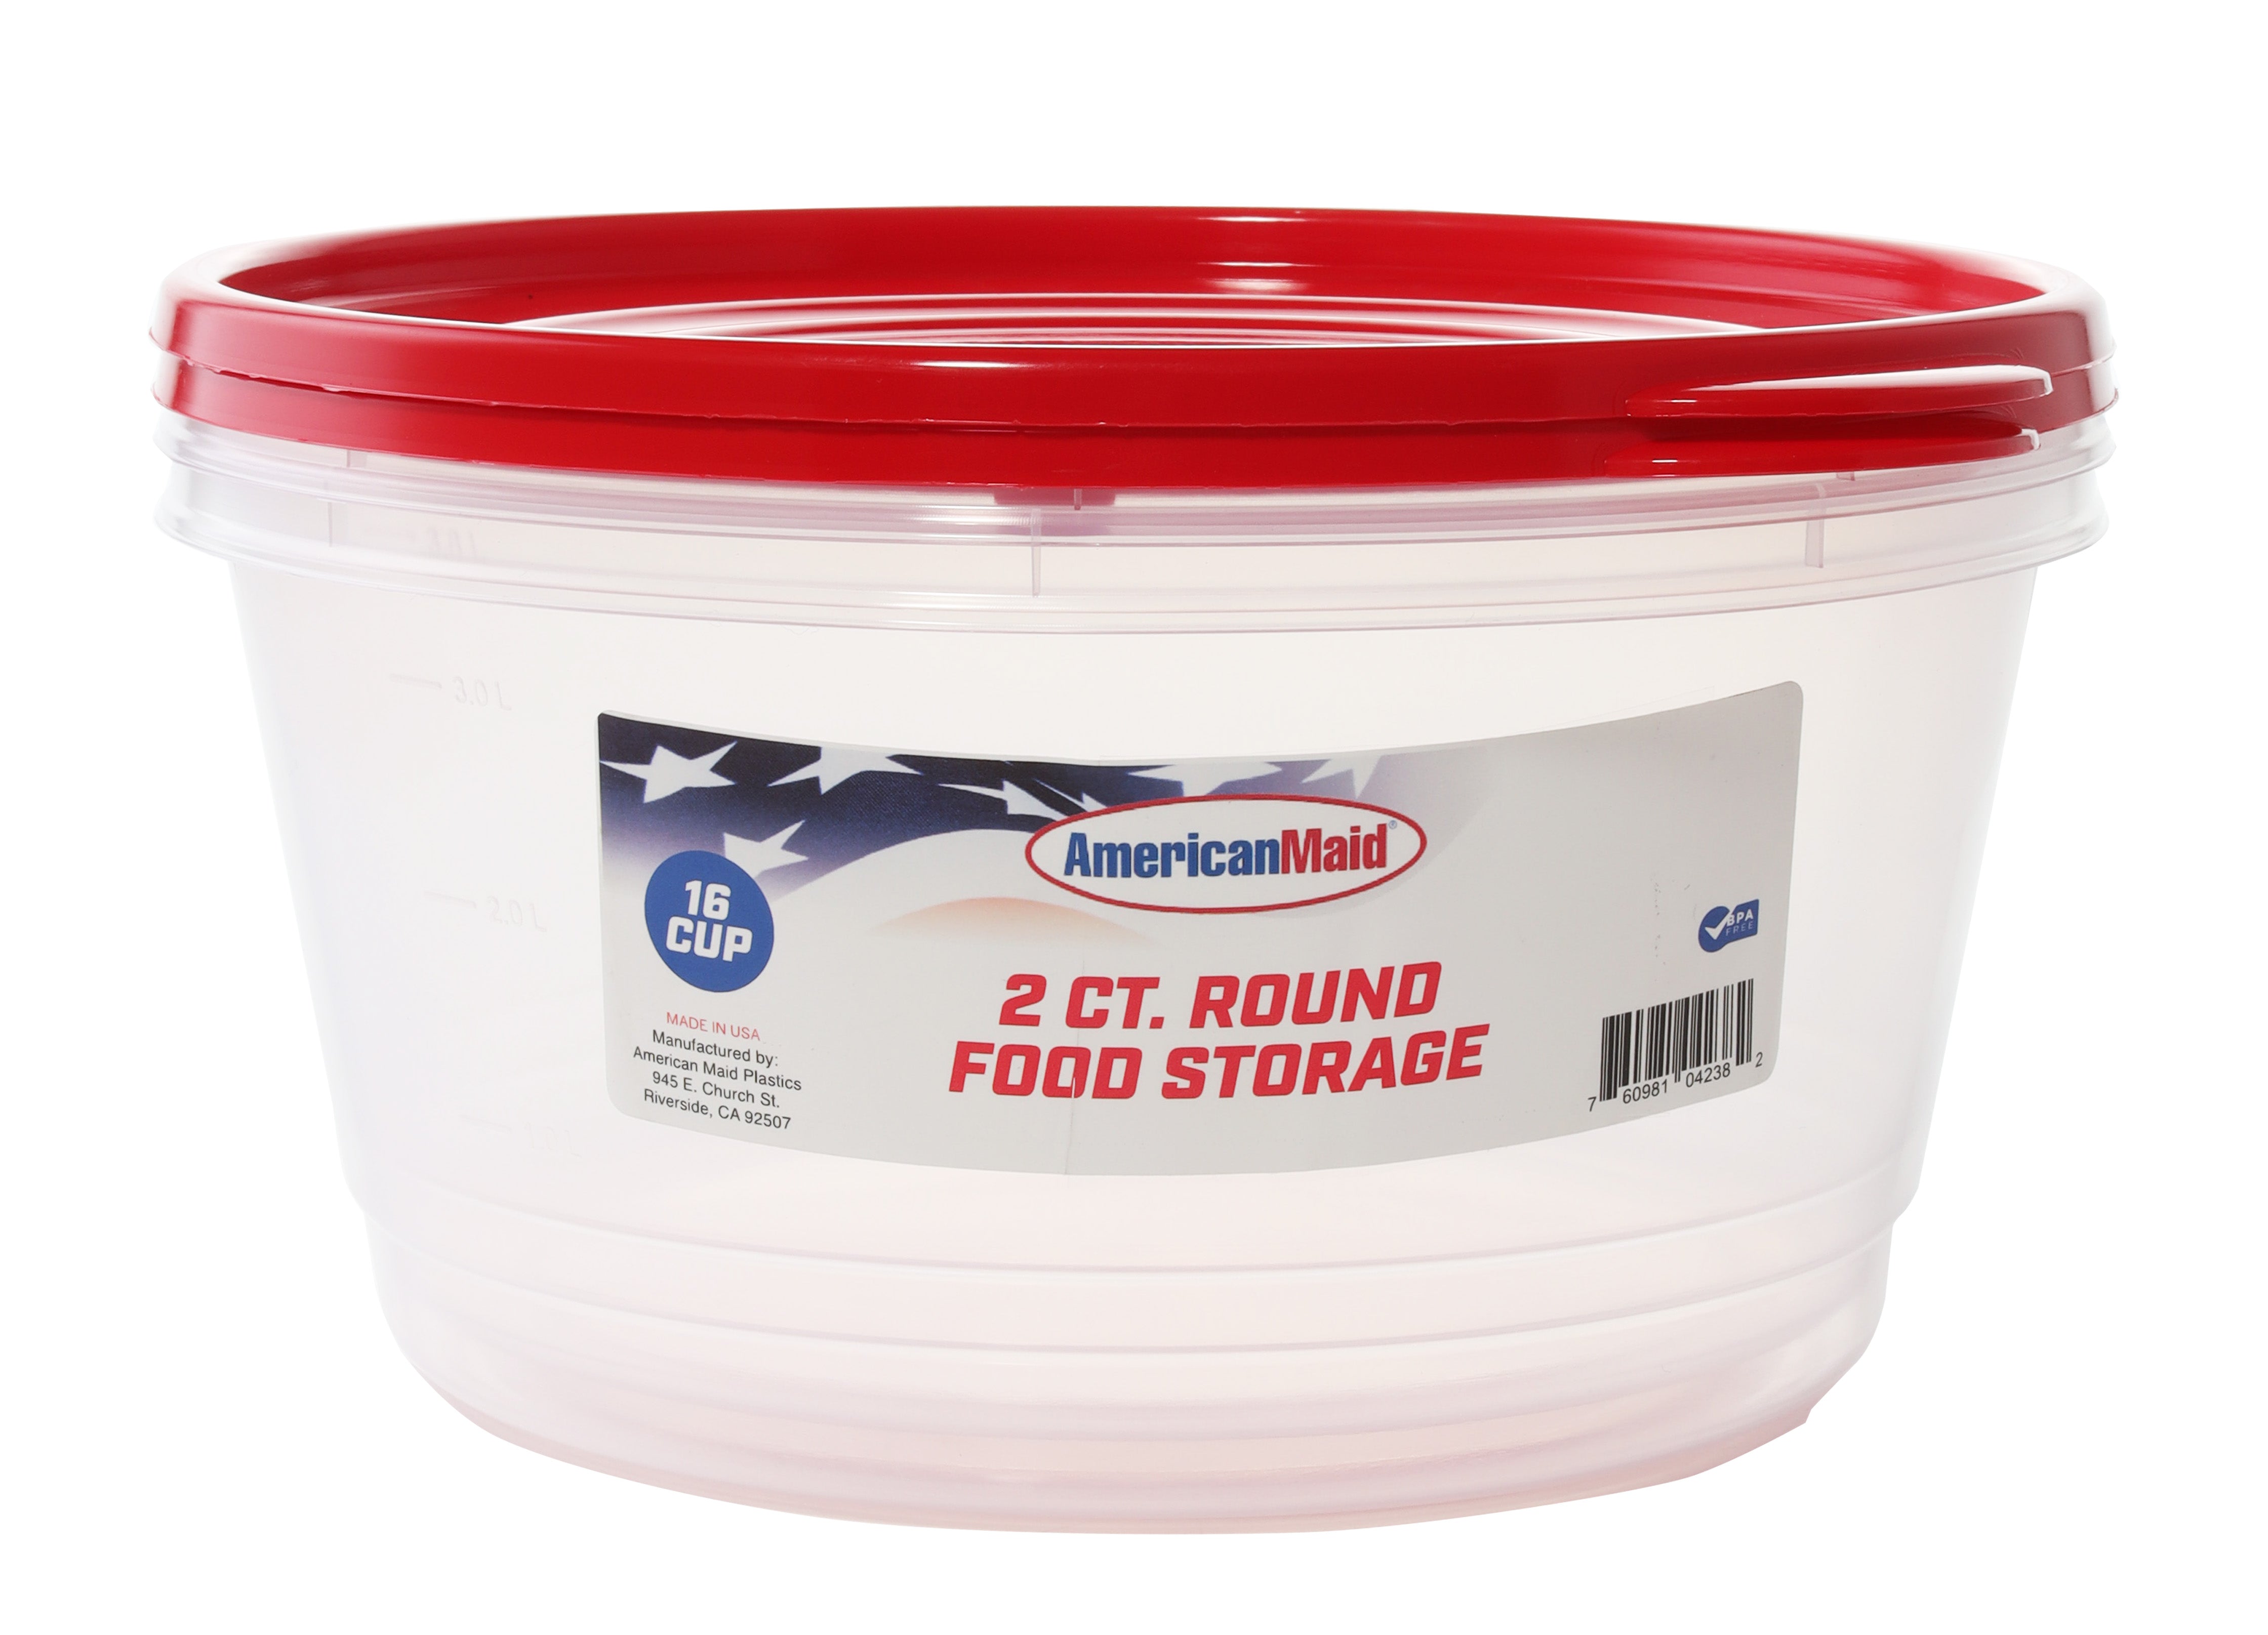 Round Food Storage / 16 Cups / Pack of 12